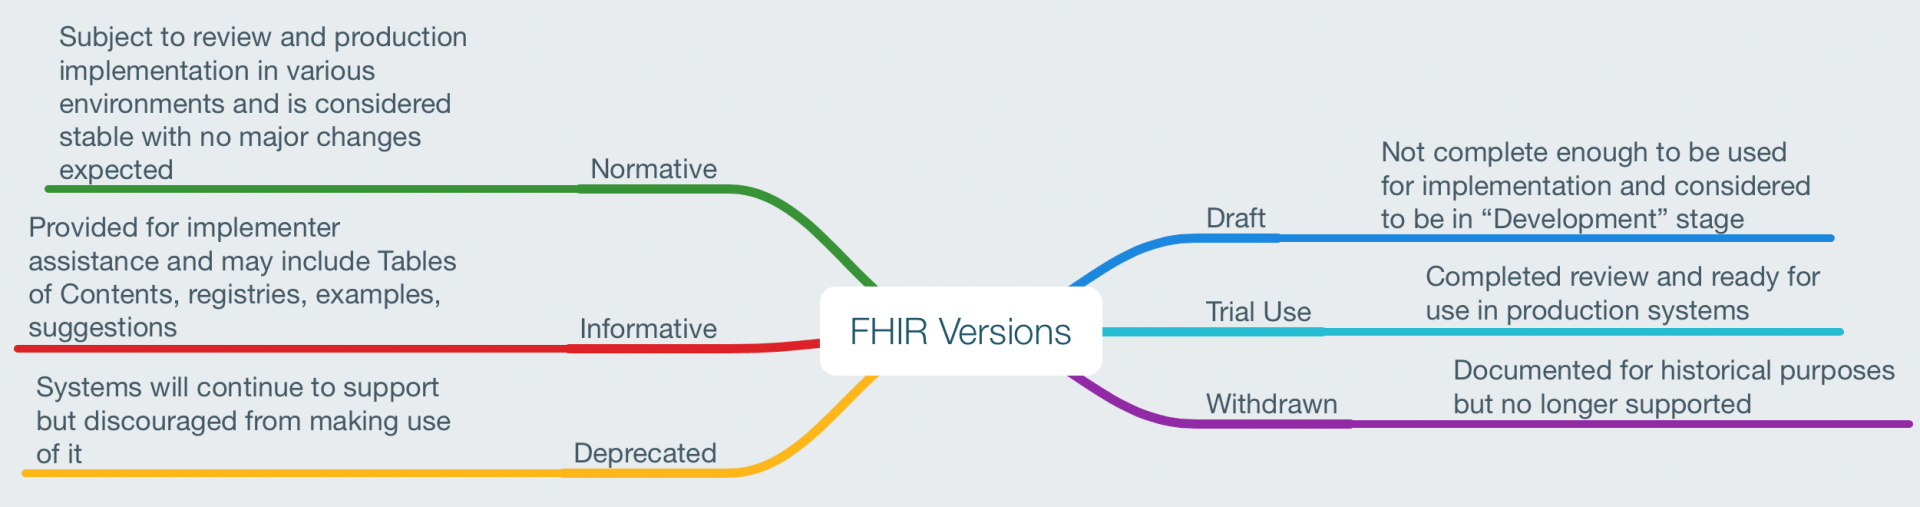 Maturity stages of FHIR Resources